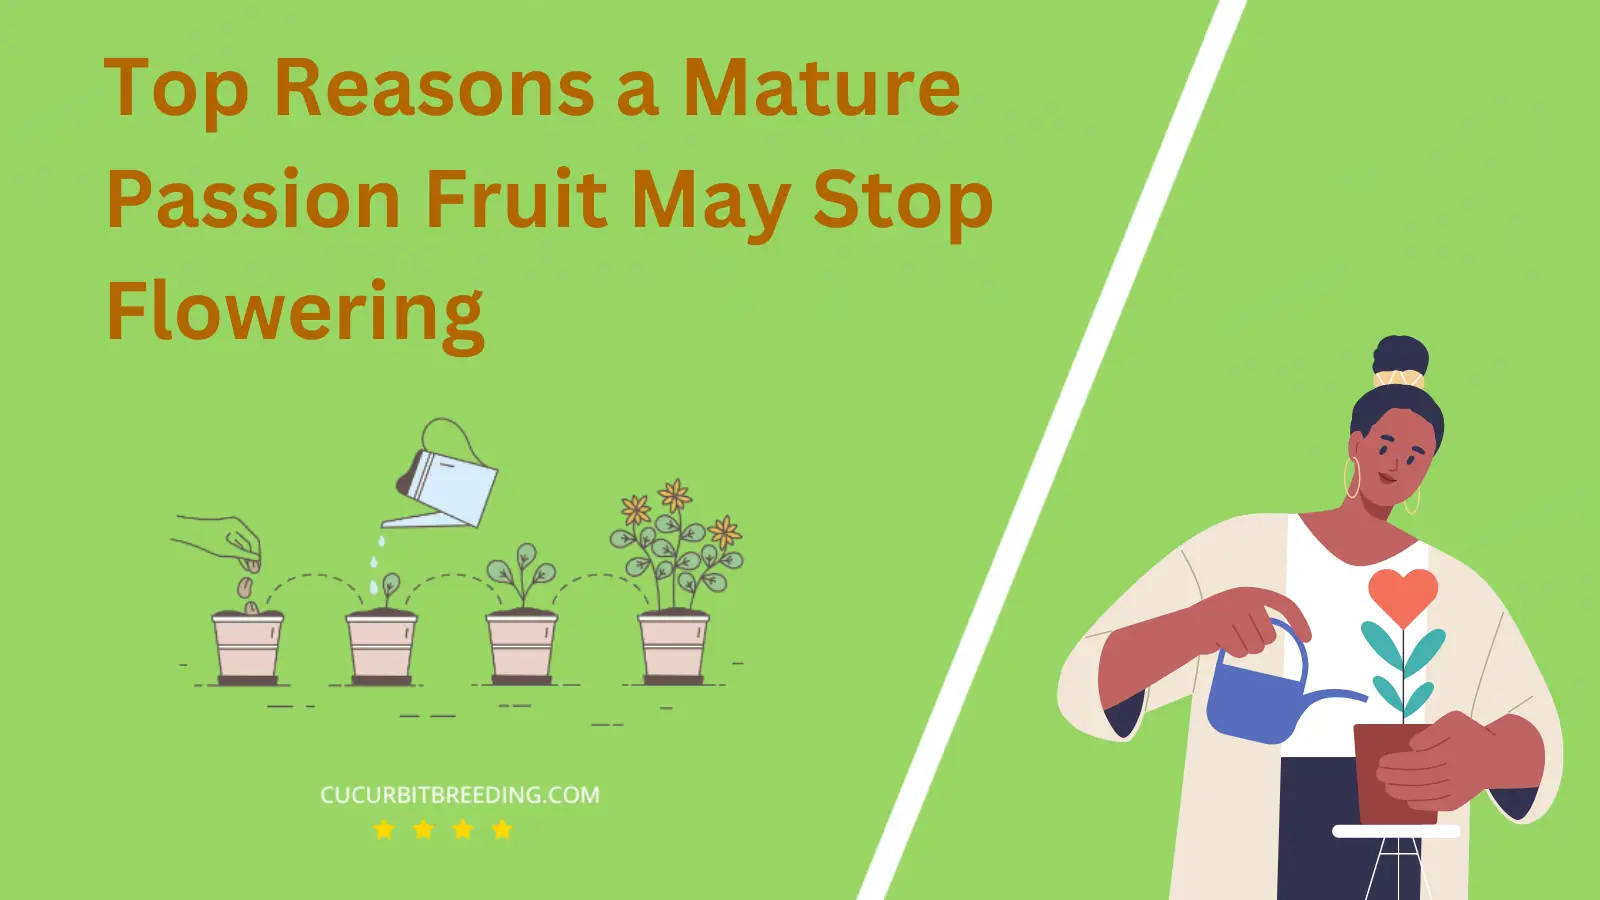 Top Reasons a Mature Passion Fruit May Stop Flowering